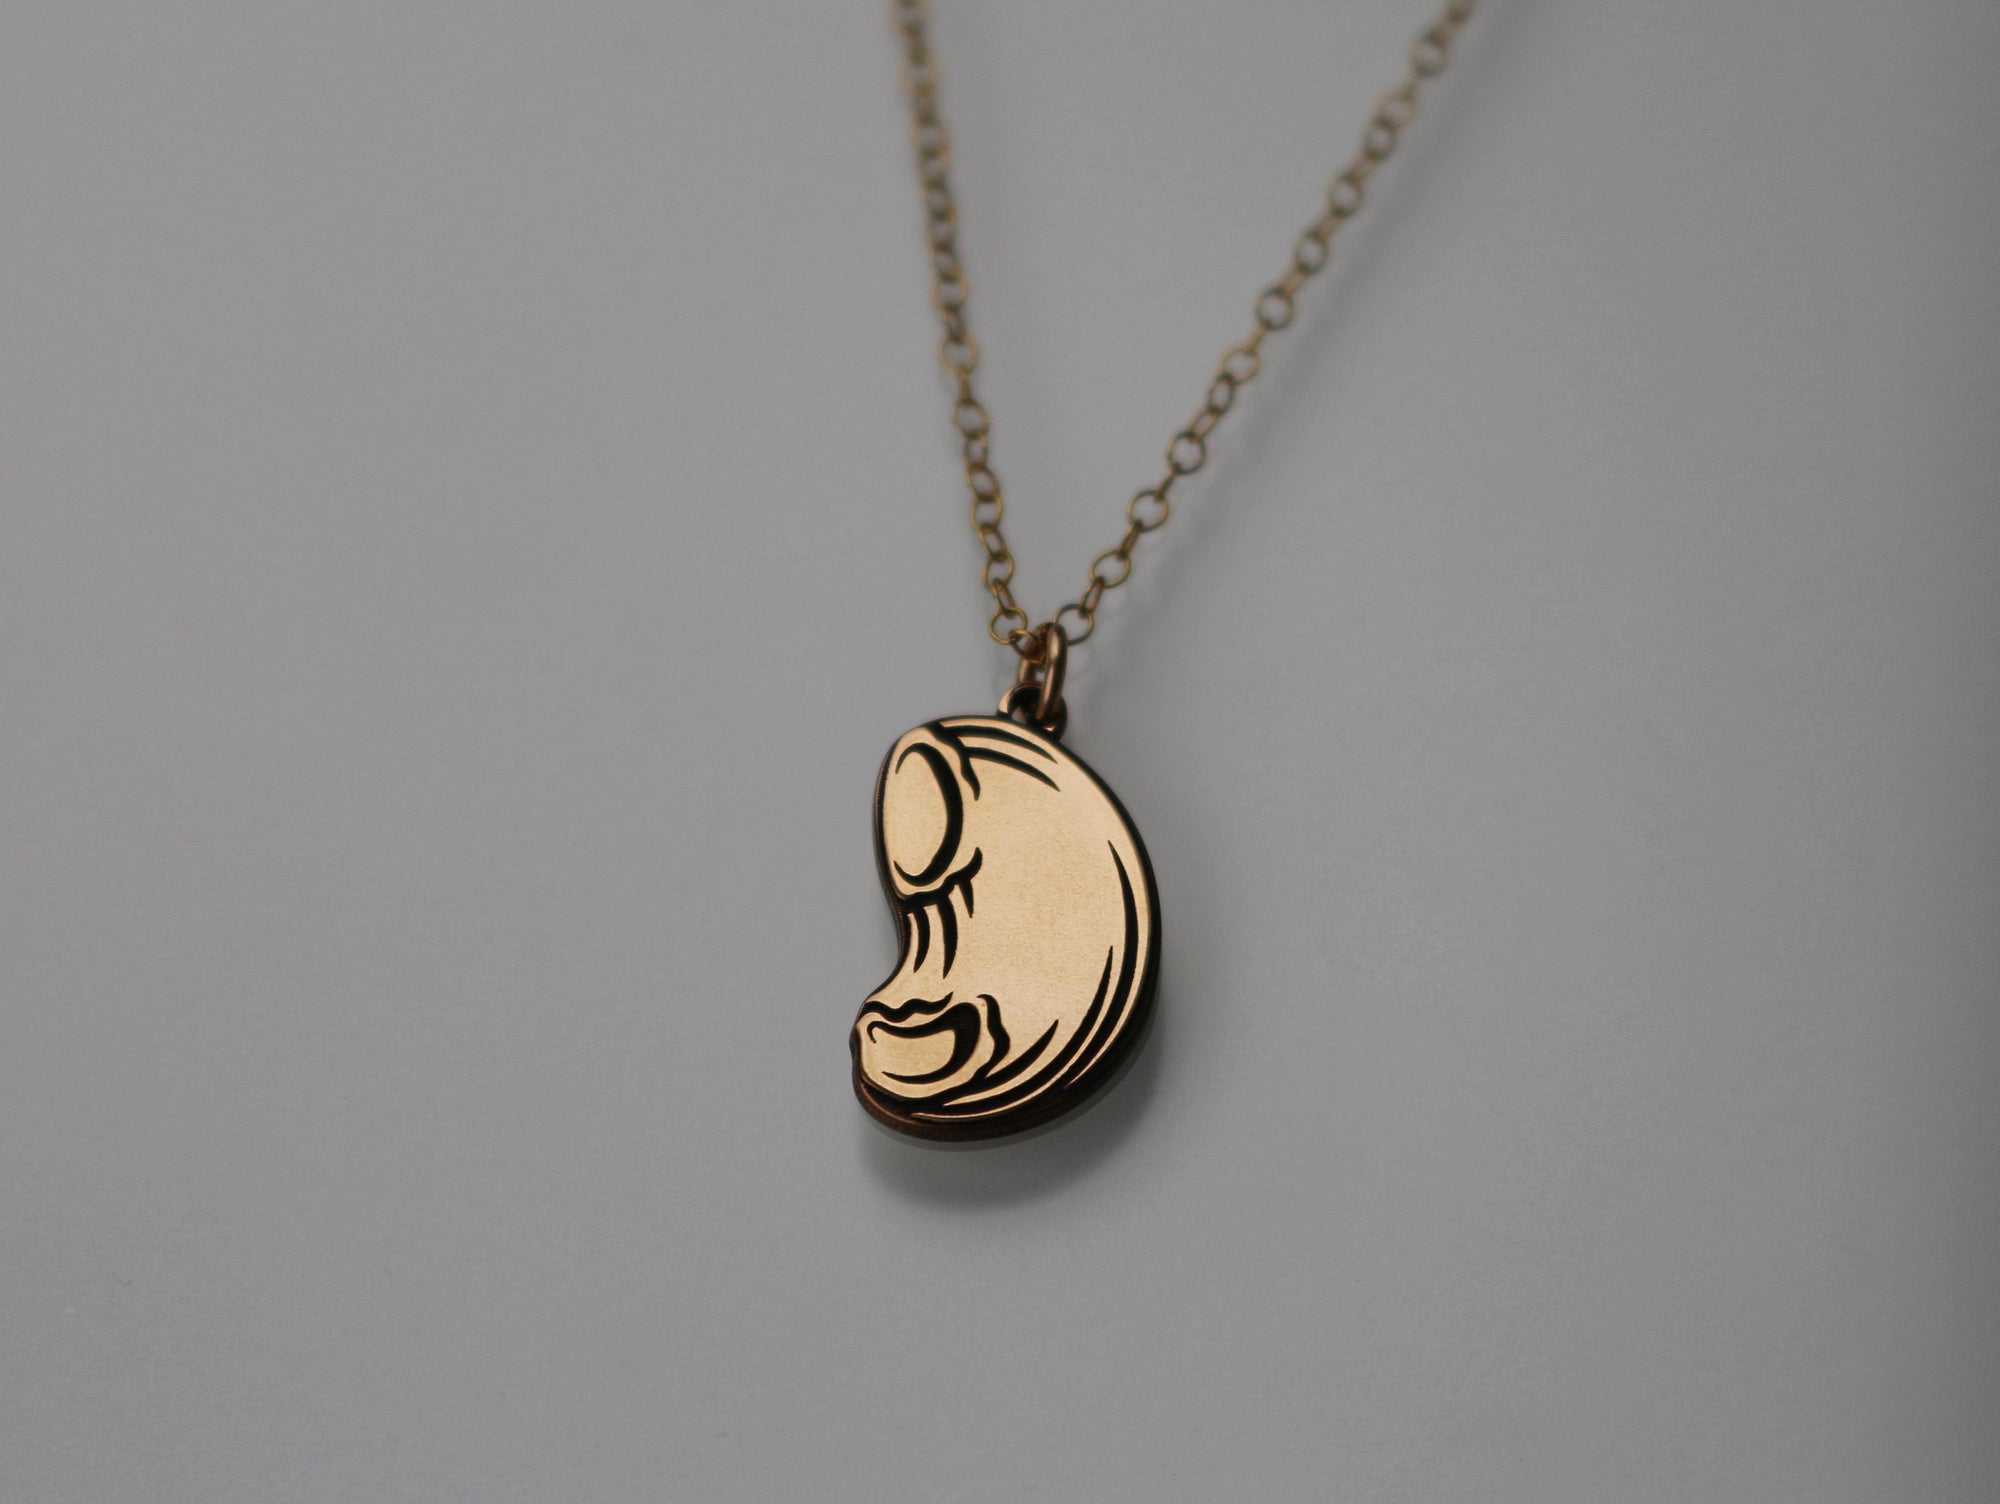 Pipe Rigate Pasta Necklace - Gold Filled